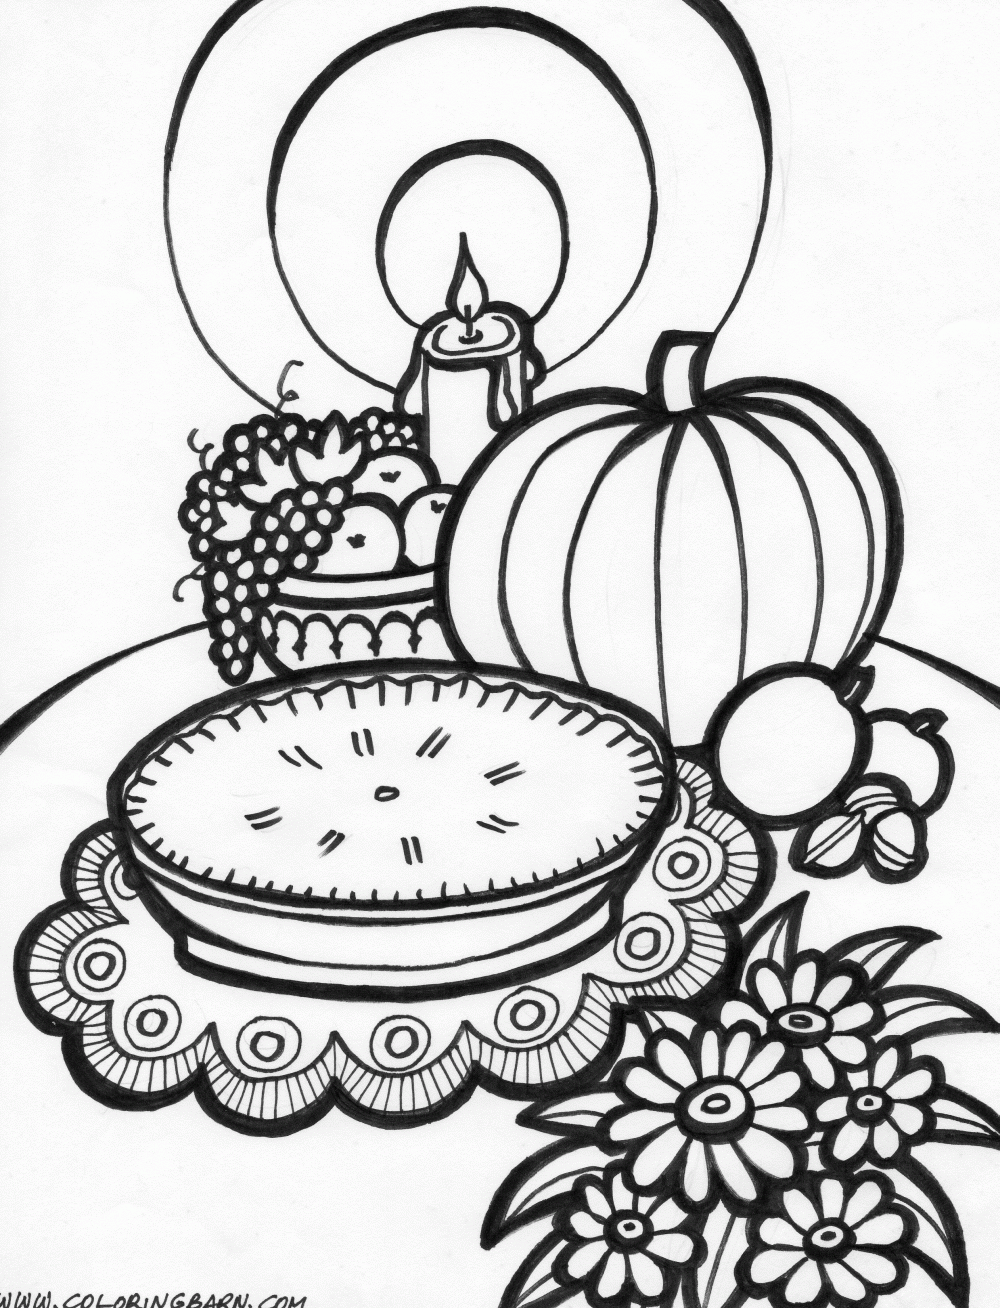 Free Thanksgiving Coloring Pages - Coloringkids.org